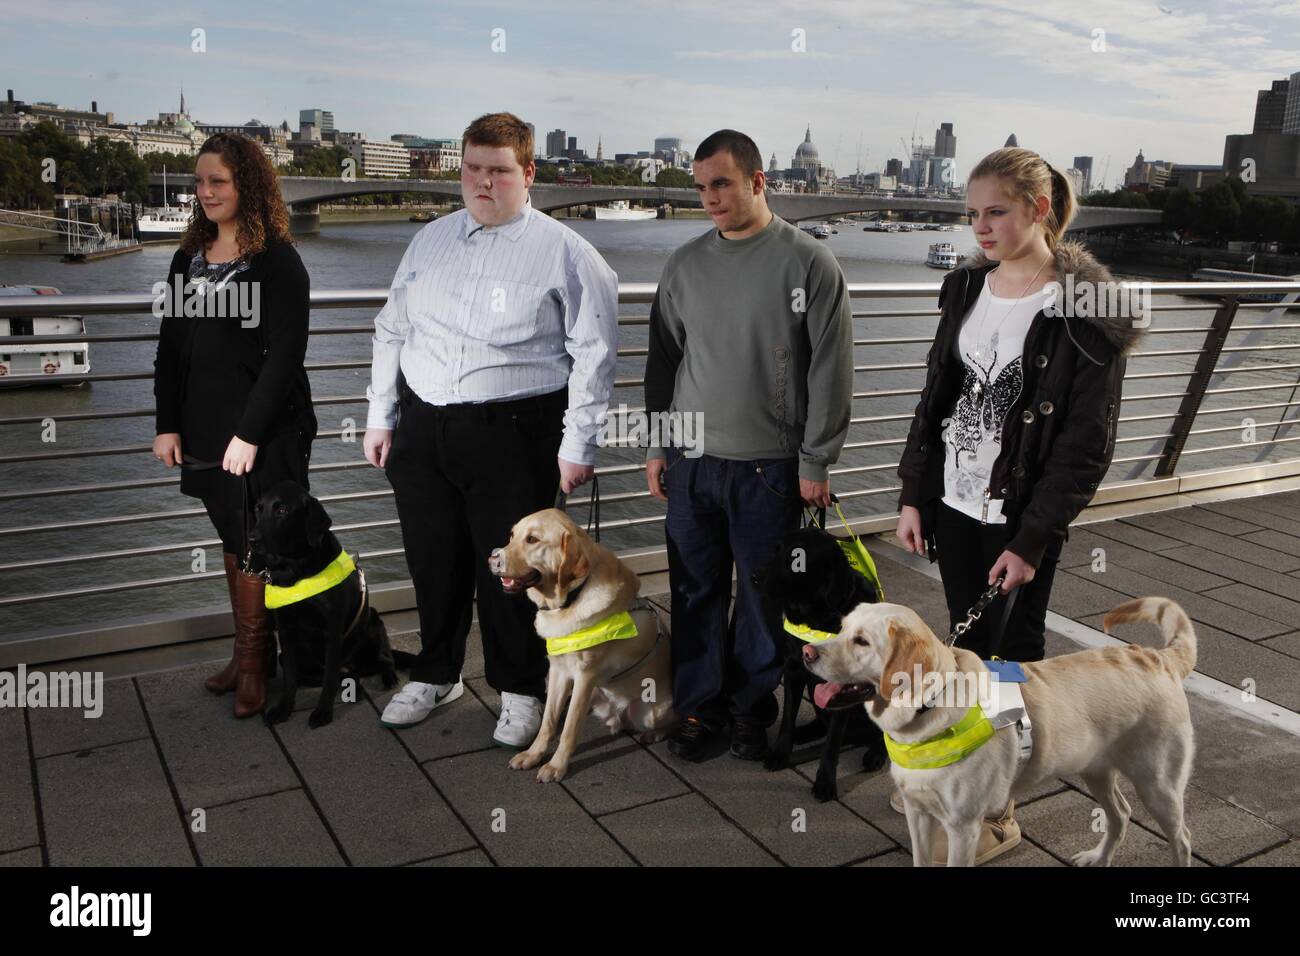 The first four people under sixteen to qualify for a Guide Dog in the UK who were united for the first time on London's Southbank. L-R Andrea Cooper 18 with Cara, Sidney Tamblin 18 with Jamie, Brad Ranson 16 with Lance and Kirsty Meinhardt 15 with Websta. Press Association Photo. Date Sunday 04 October 2009. Over 18,000 blind and partially sighted youngsters are missing out on crucial help with mobility, independence and life skills according to research by Guide Dogs. Picture Credit should read David Parry/ PA Stock Photo